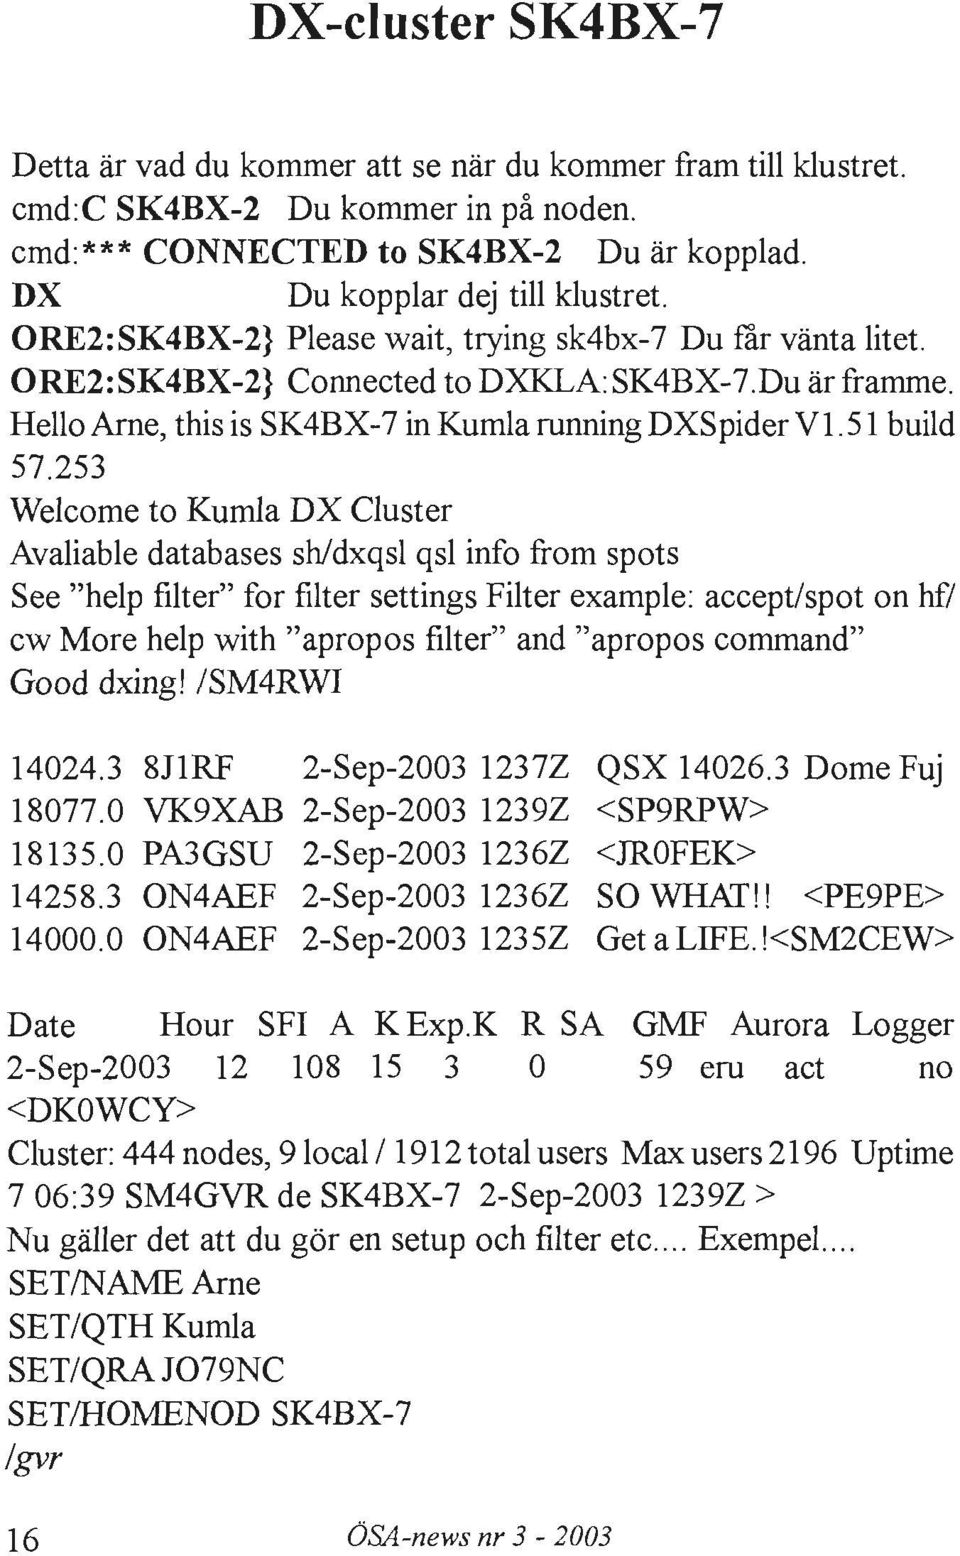 253 Welcome to Kumla DX Cluster Avaliable databases sh/dxqsl qsl info from spots See "help filter" for filter settings Filter example: accept/spot on hf/ cw More help with "apropos filter" and